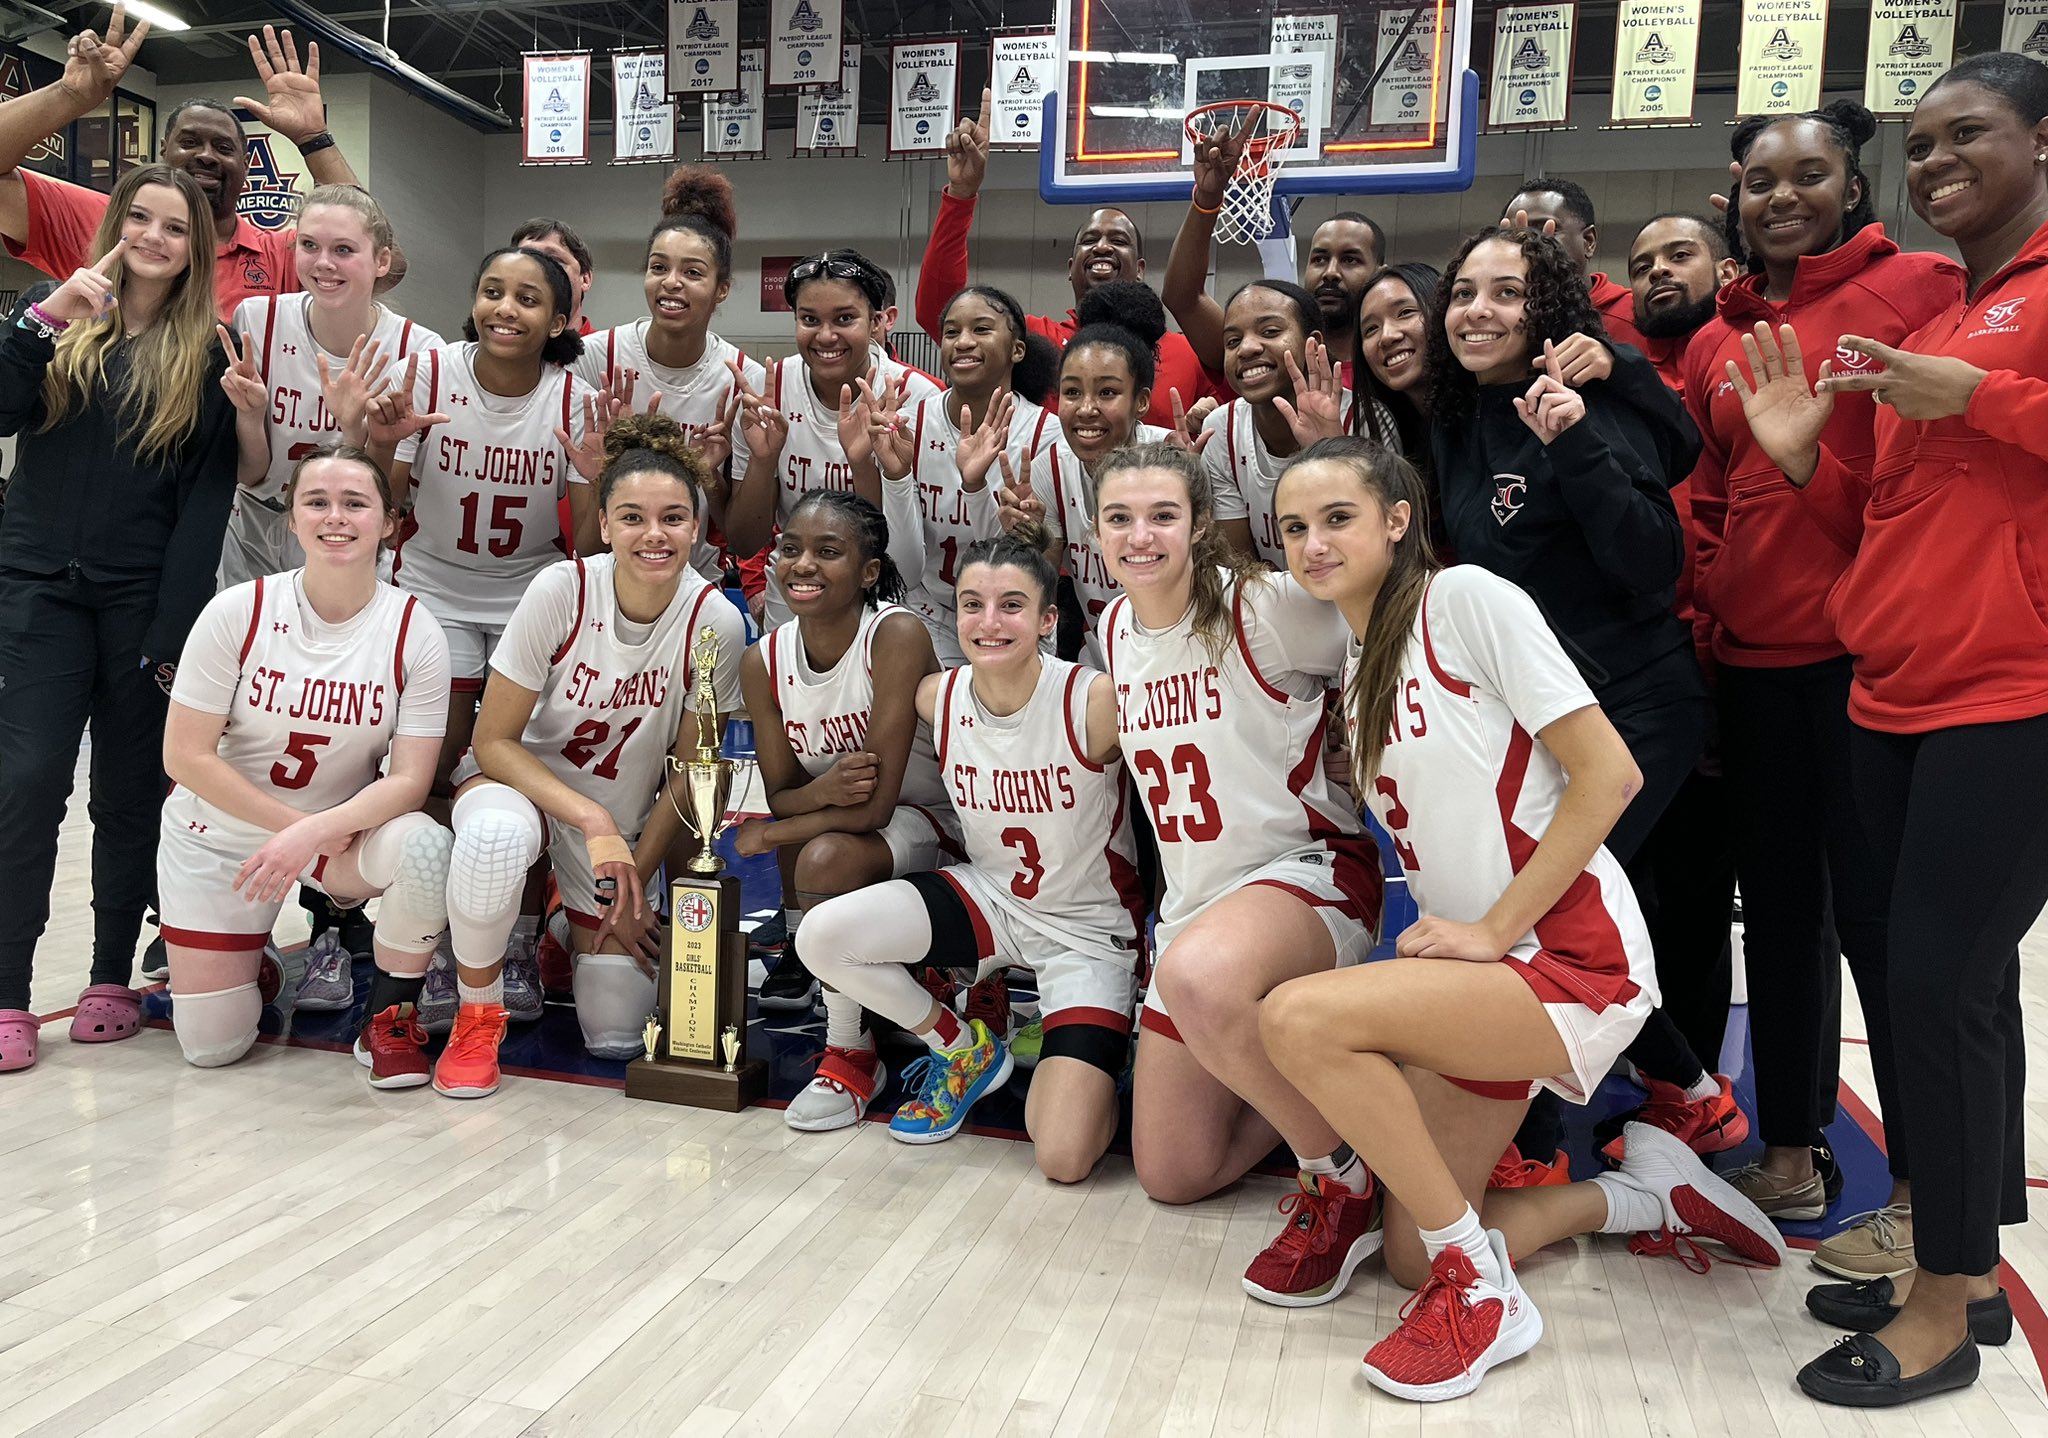 St. John's girls go Back to Back and win WCAC Championship